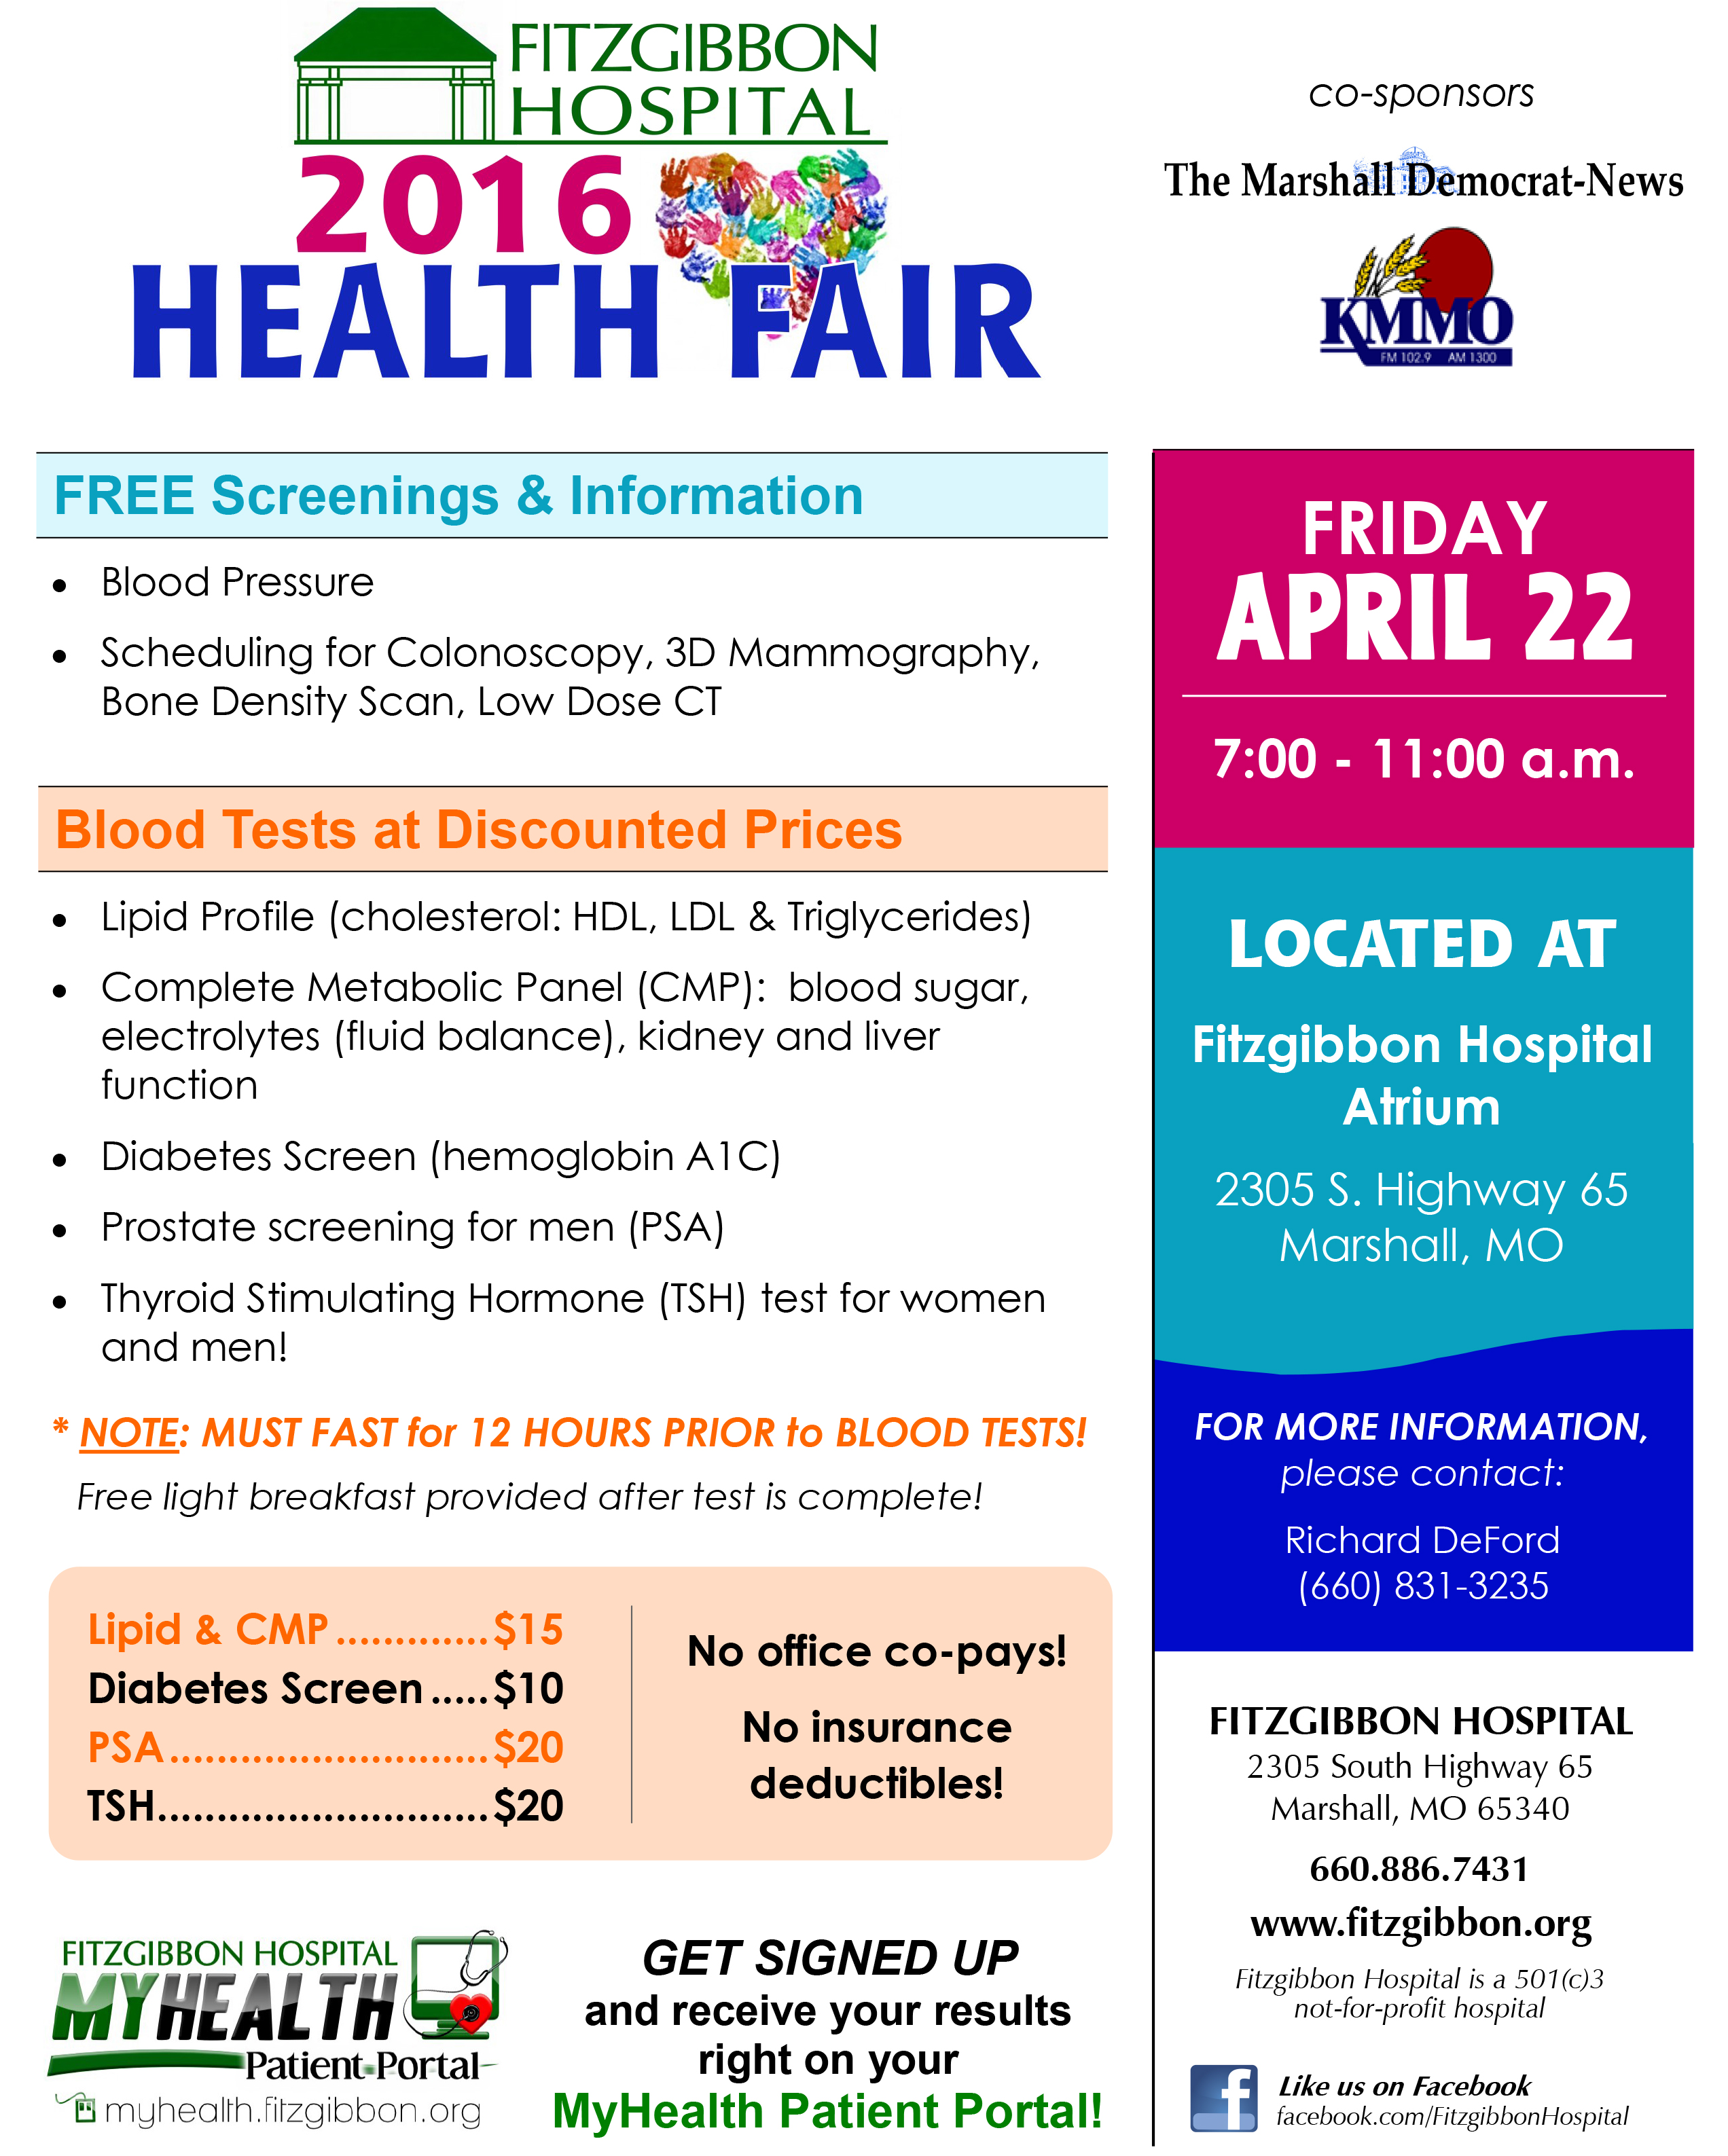 Fitzgibbon Health Fair Offers Opportunity to Know Your Numbers ...